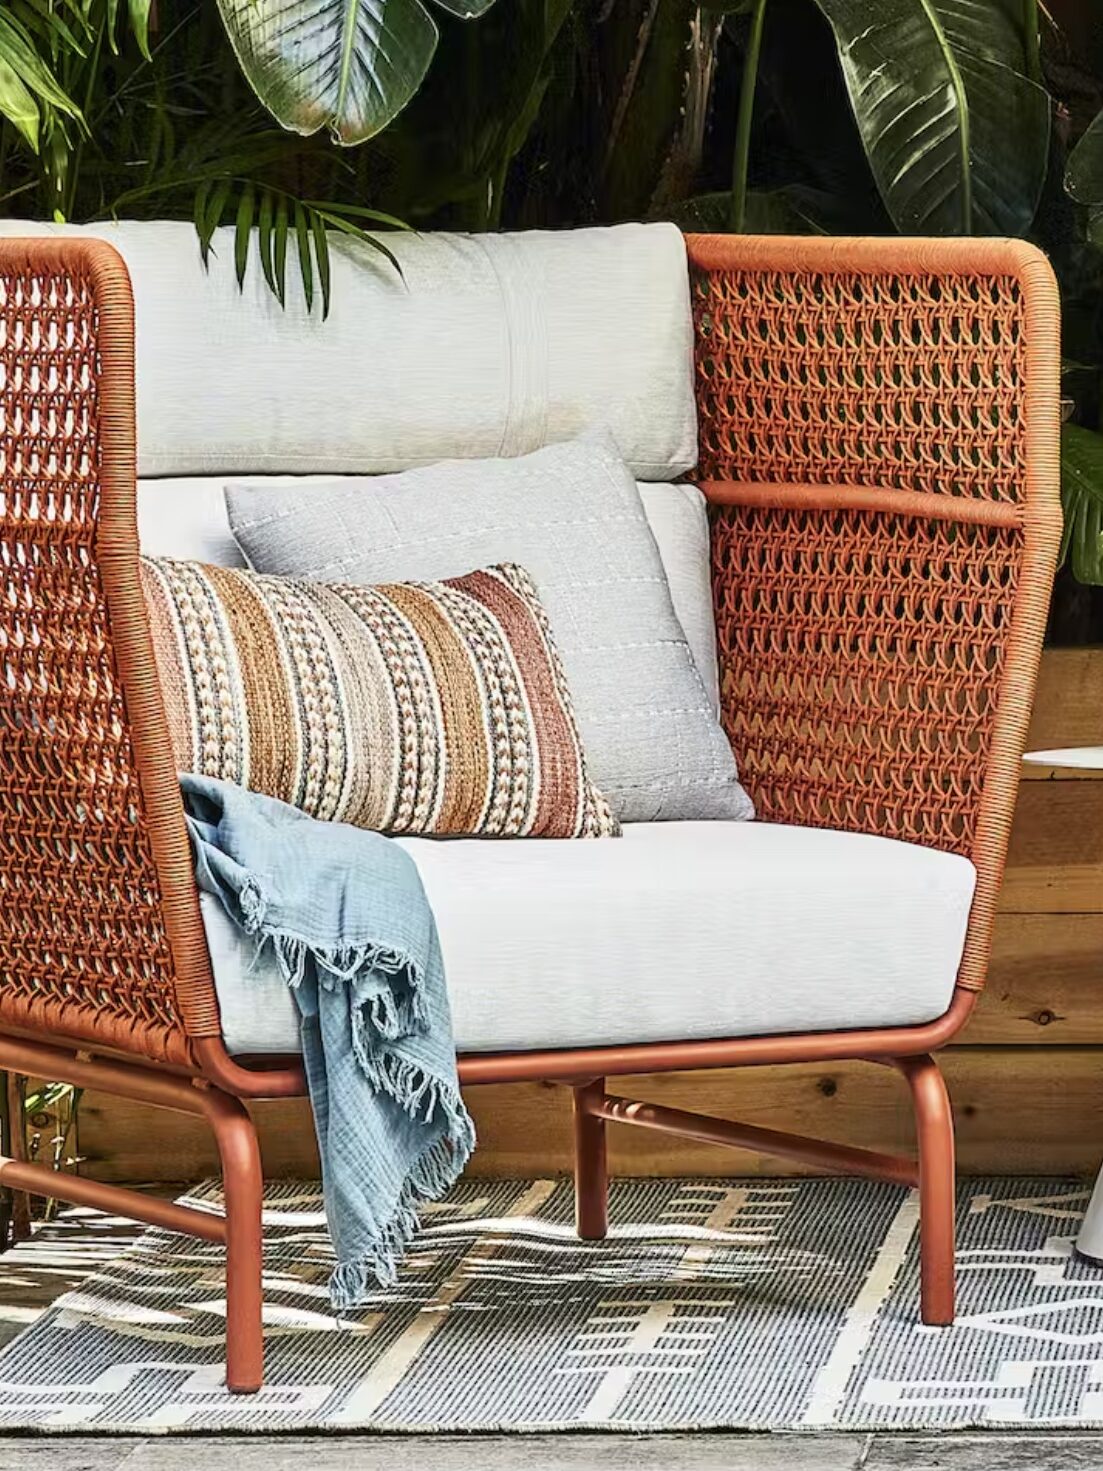 A woven outdoor chair with cushions